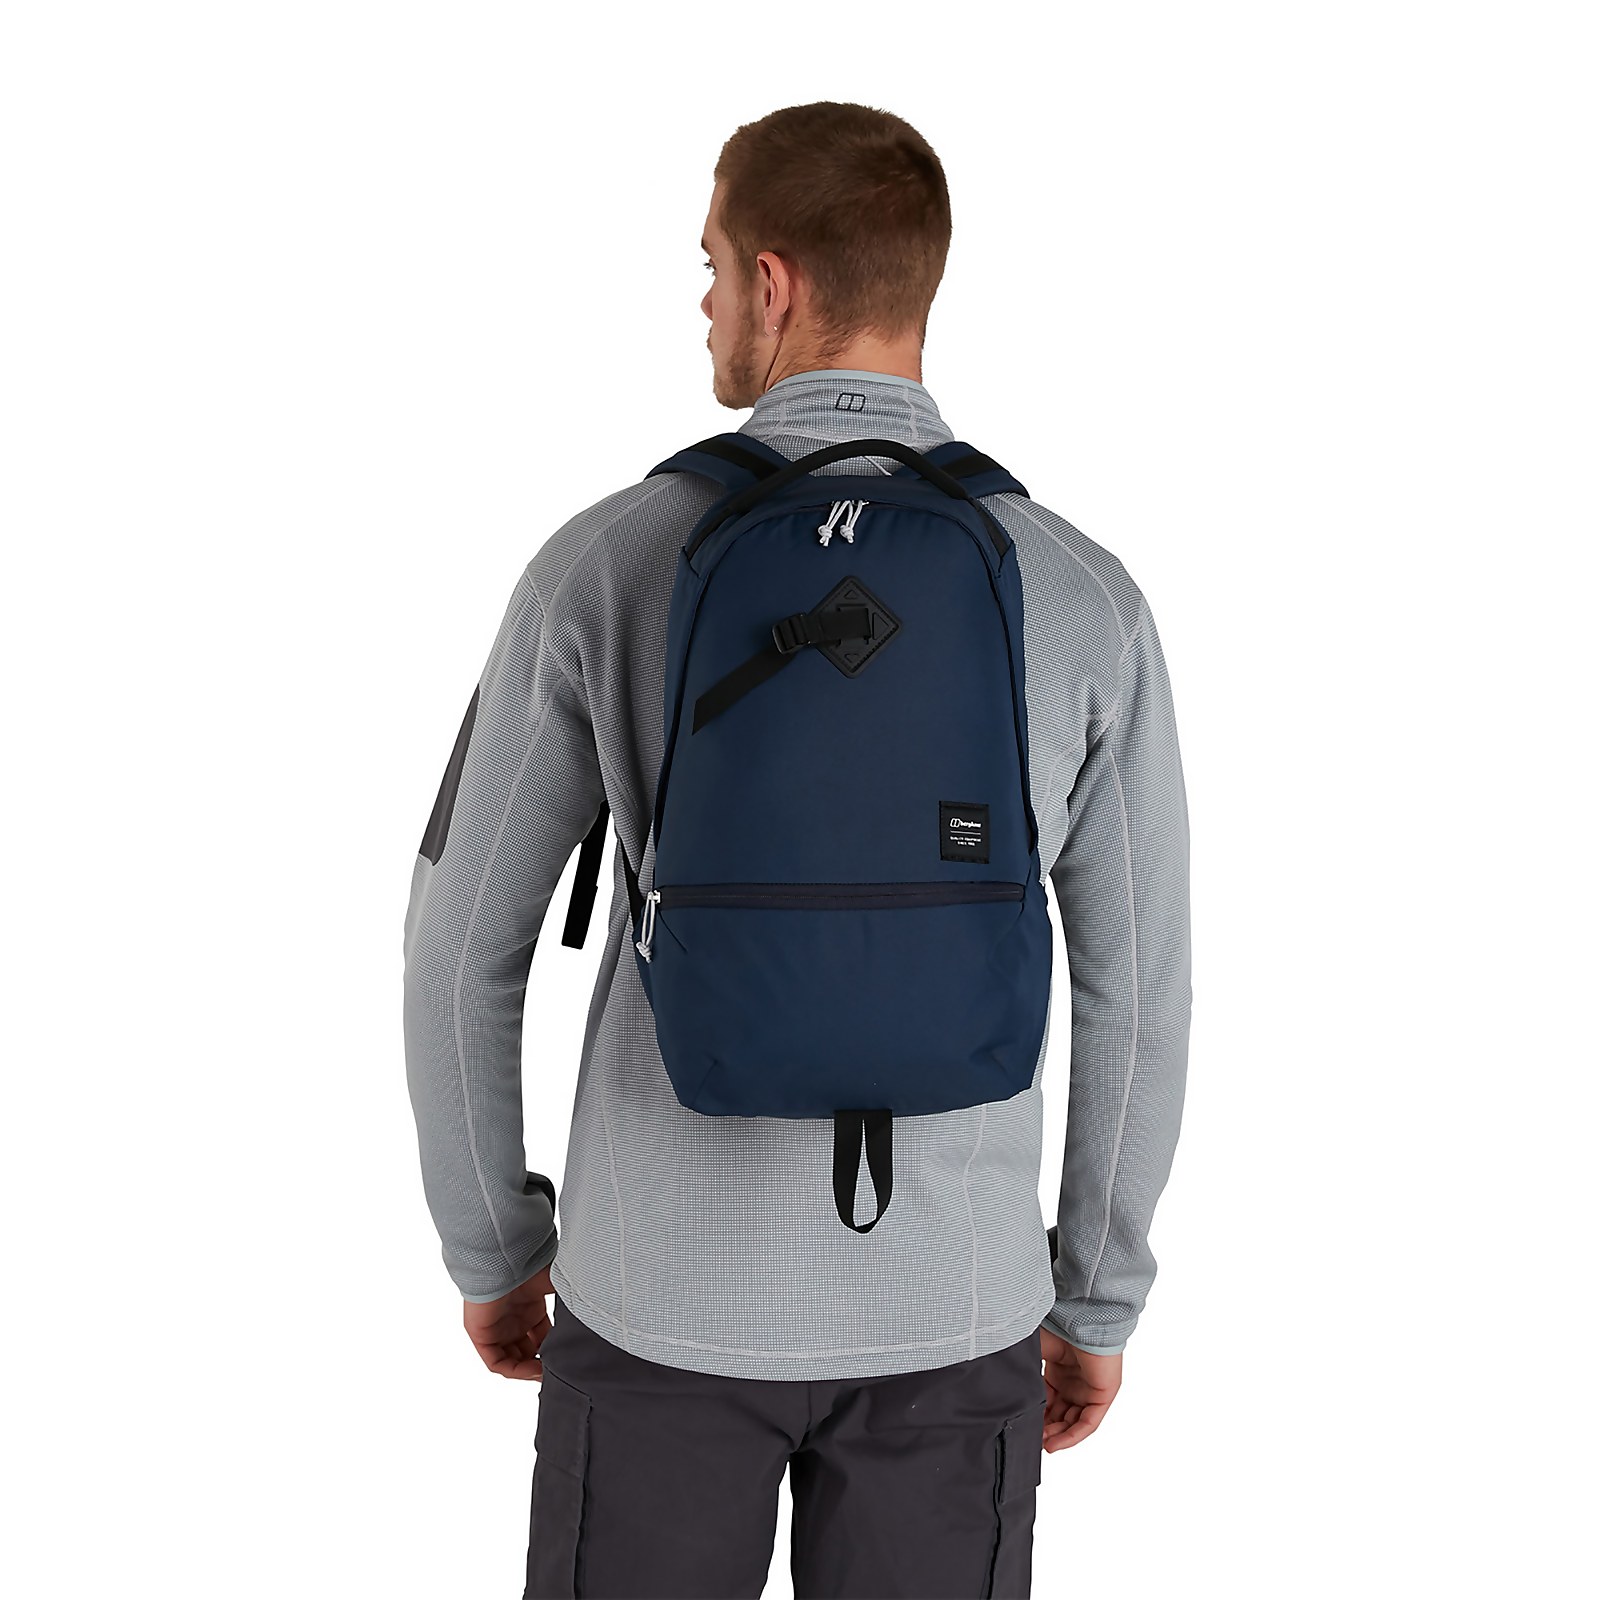 Berghaus Recognition 25 Rucksack - Blue - One Size